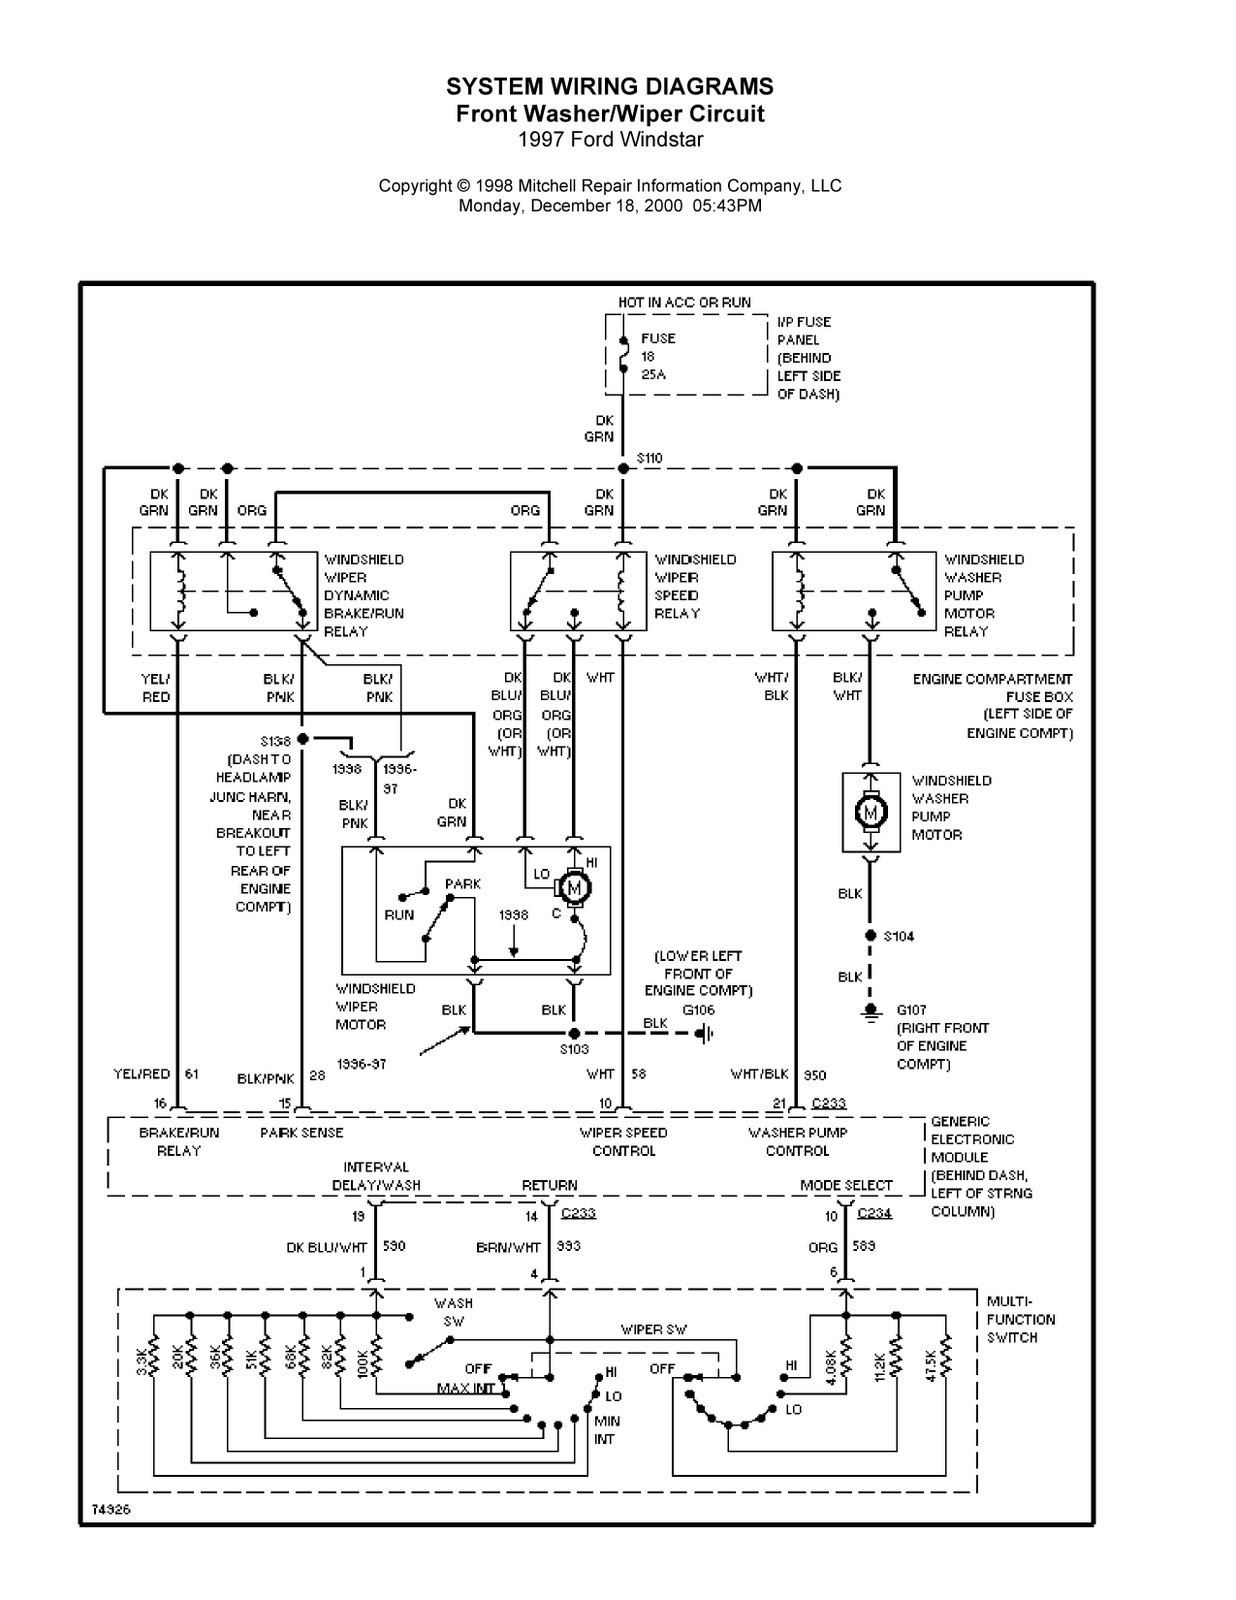 File Name: Charging System Wiring Diagram For 2000 Ford Mustang